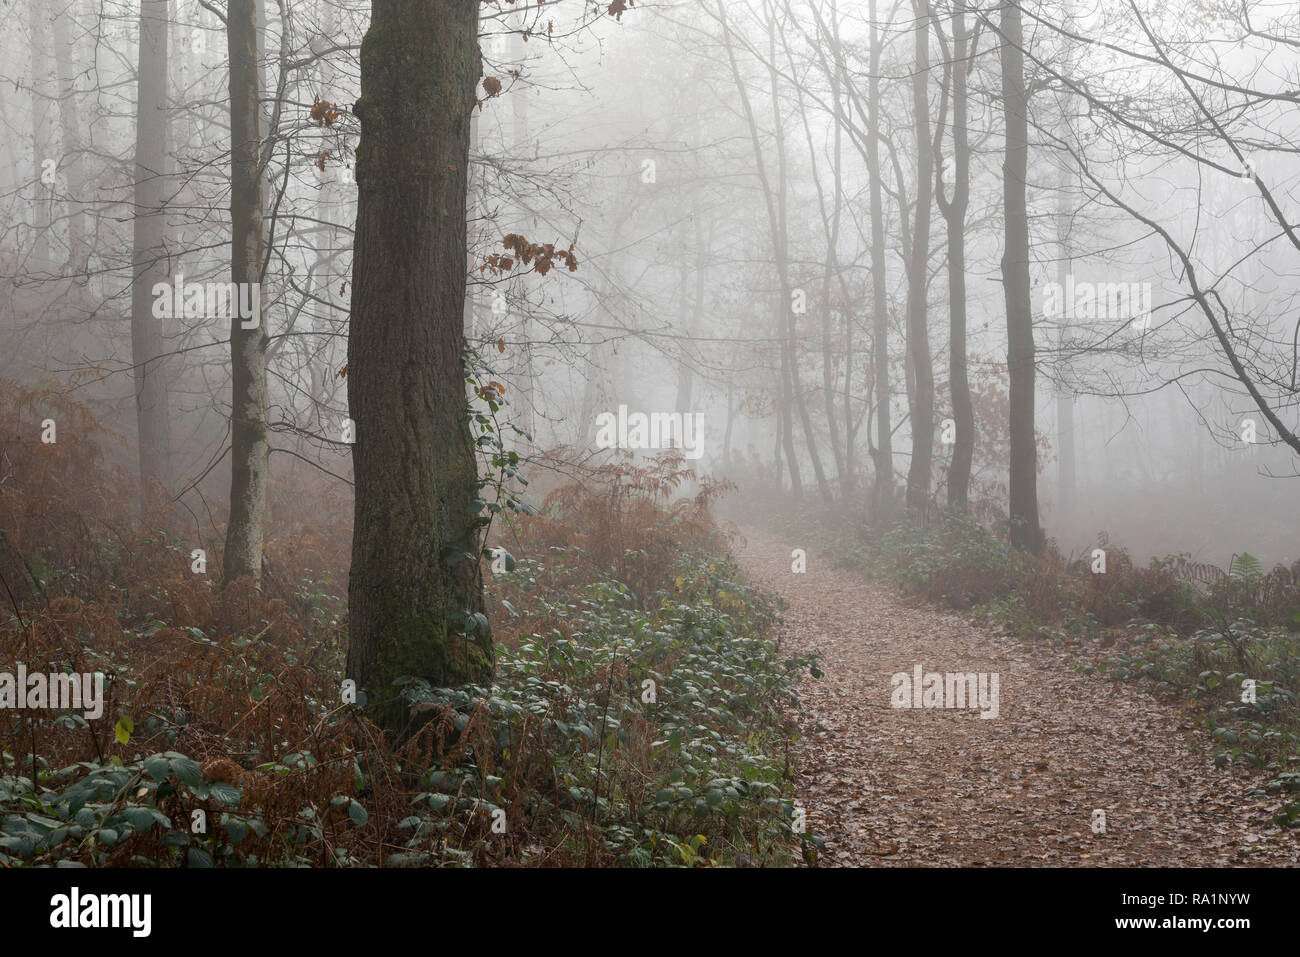 Atmospheric winter morning in Erncroft woods, Etherow country park, Stockport, England. Foggy conditions in the dense forest. Stock Photo